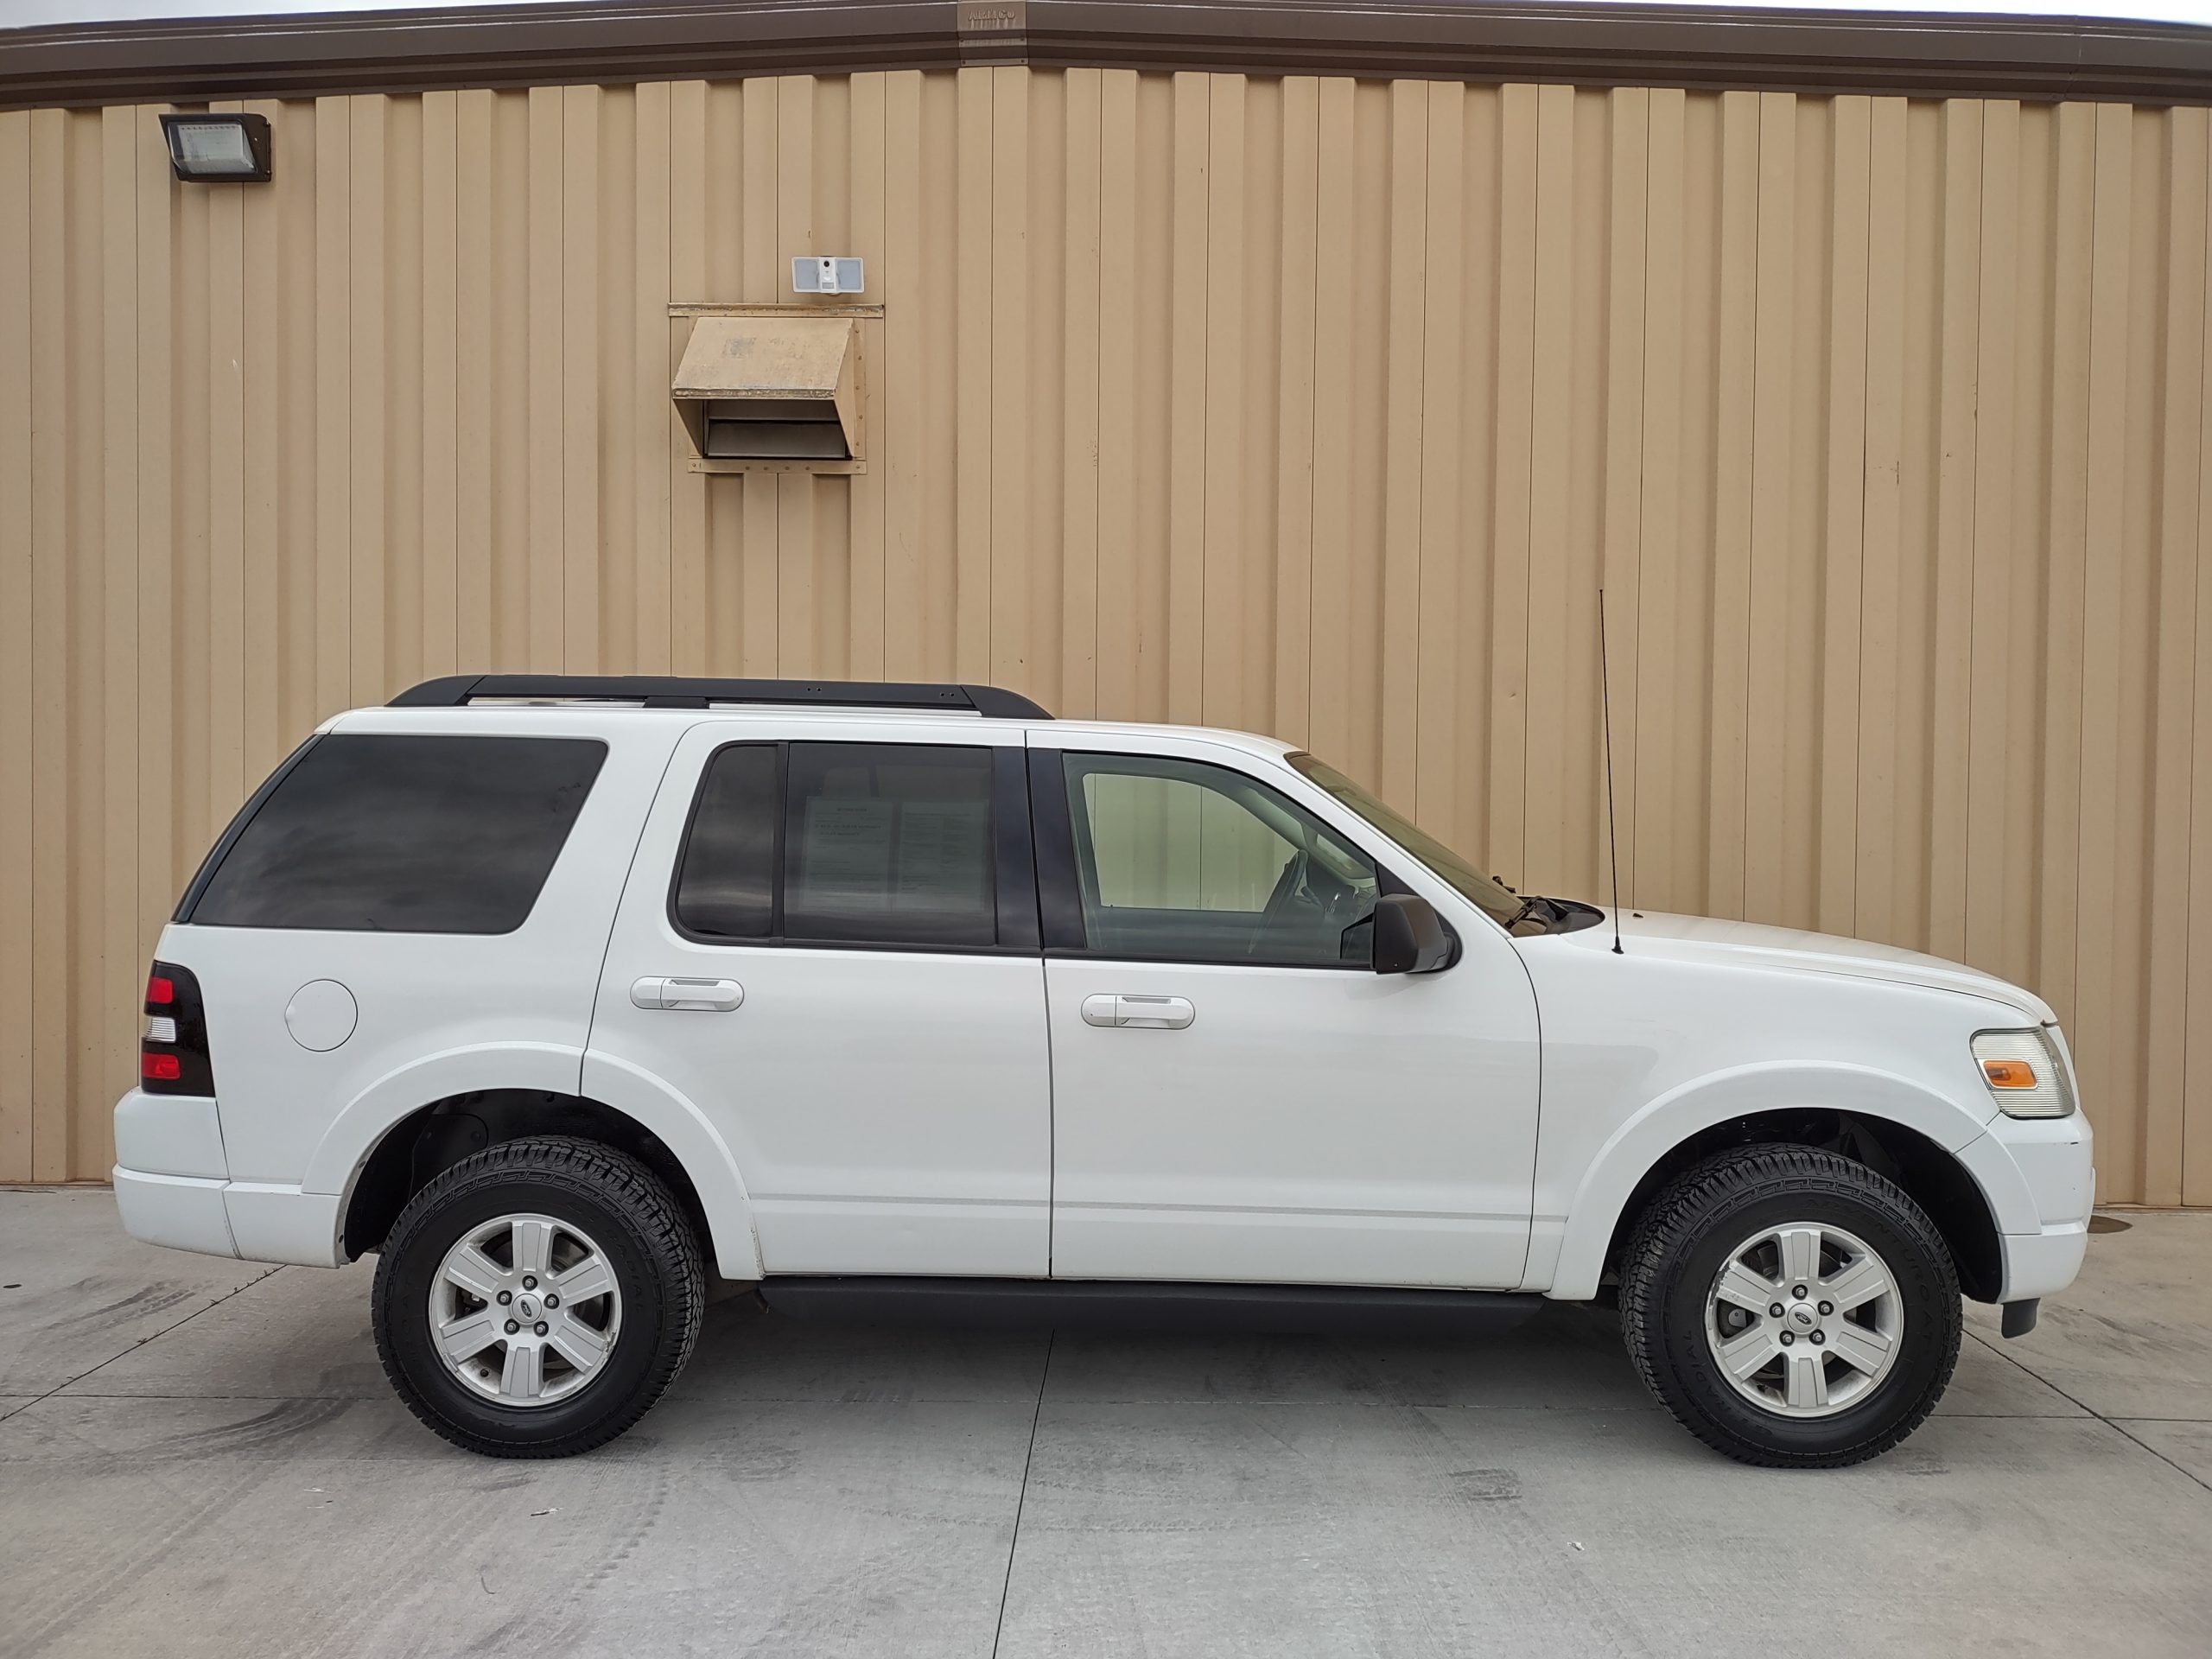 Used 2010 Ford Explorer XLT SUV for sale in 